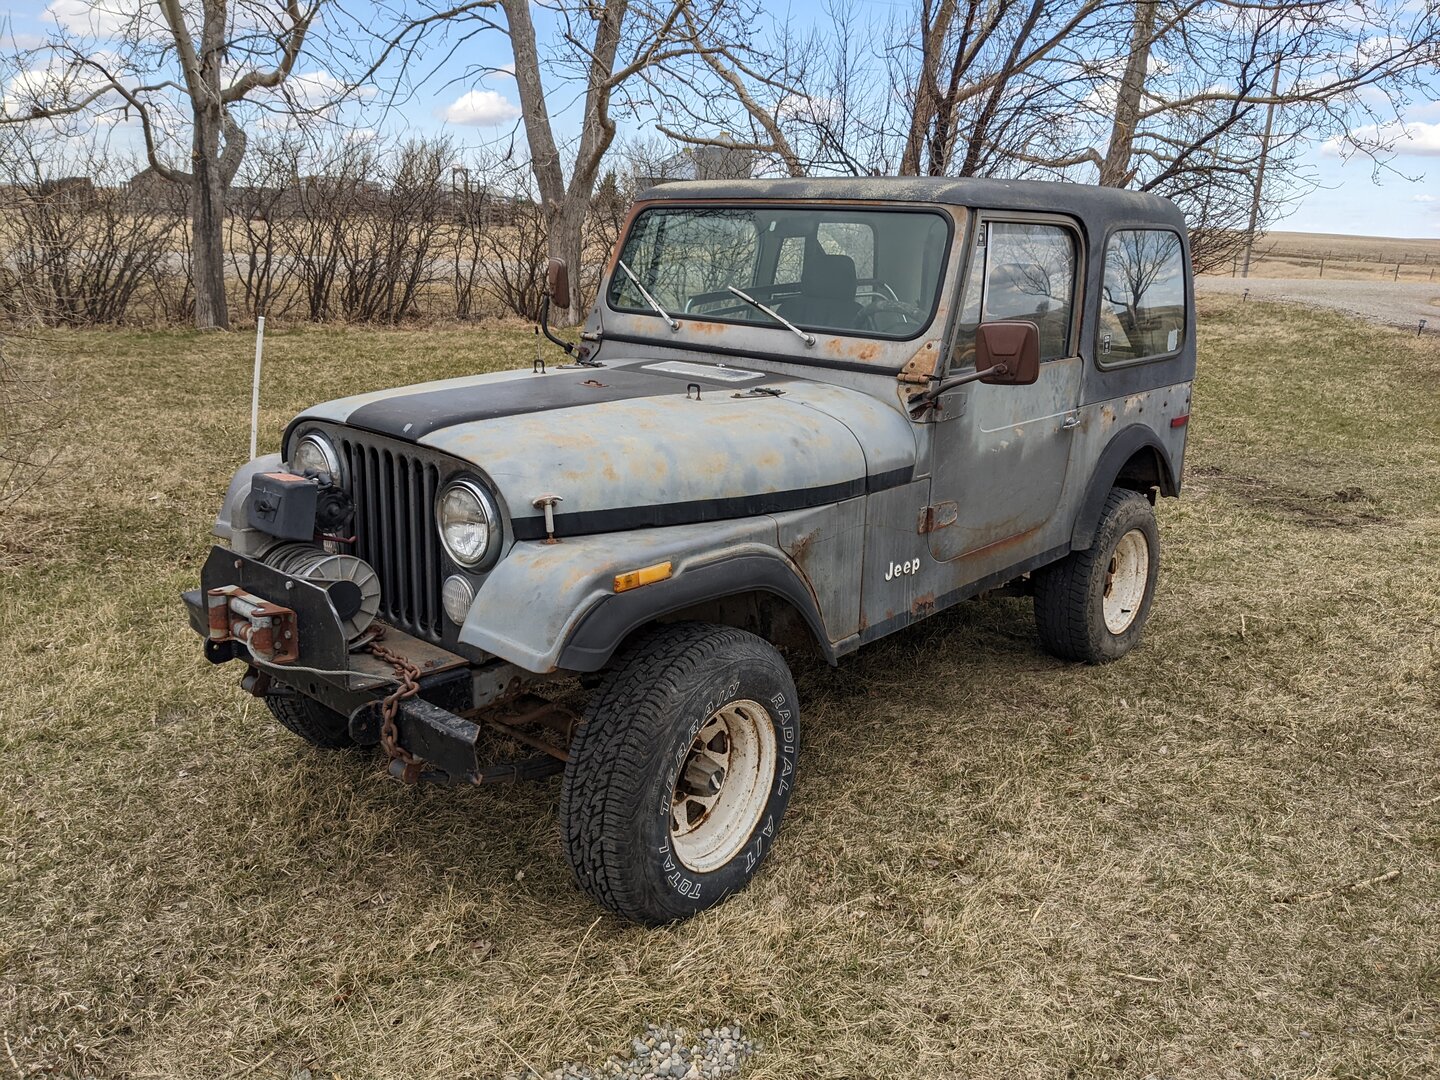 1979 CJ7 Rapid restore - 1 Year build from tired and rusty to all go and some show..